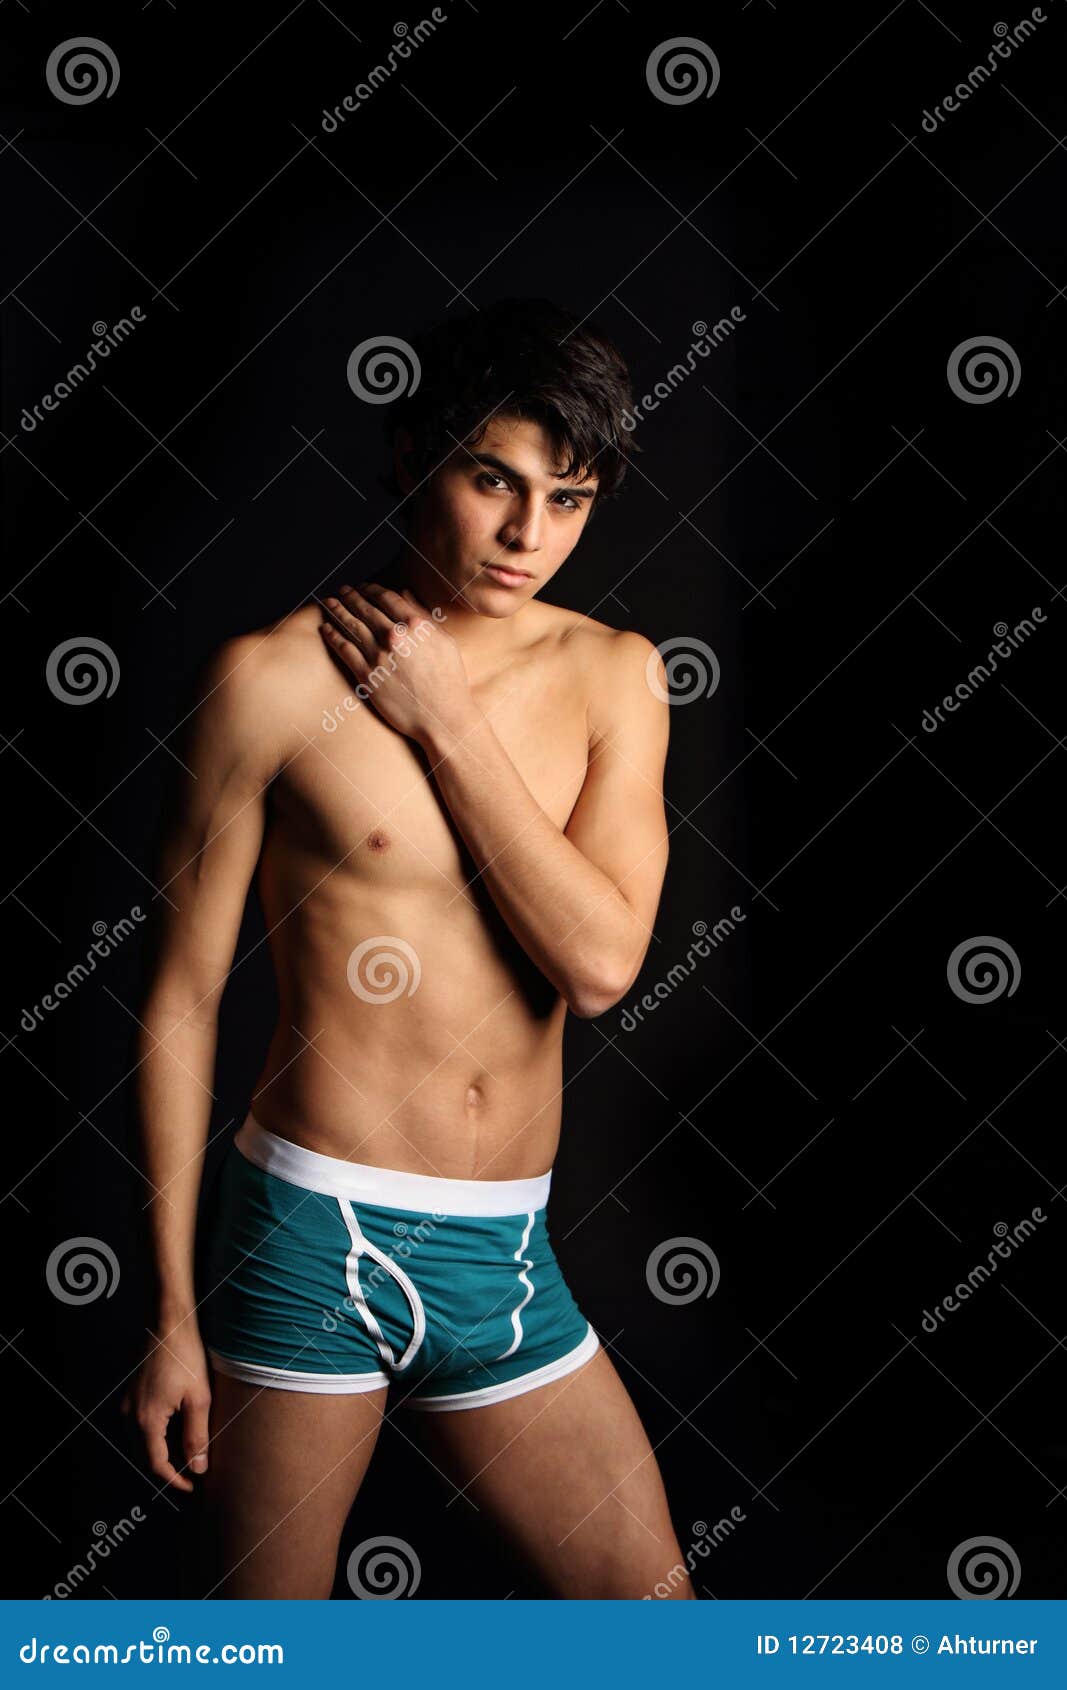 Underwear Model stock photo. Image of motion, looking - 12723408